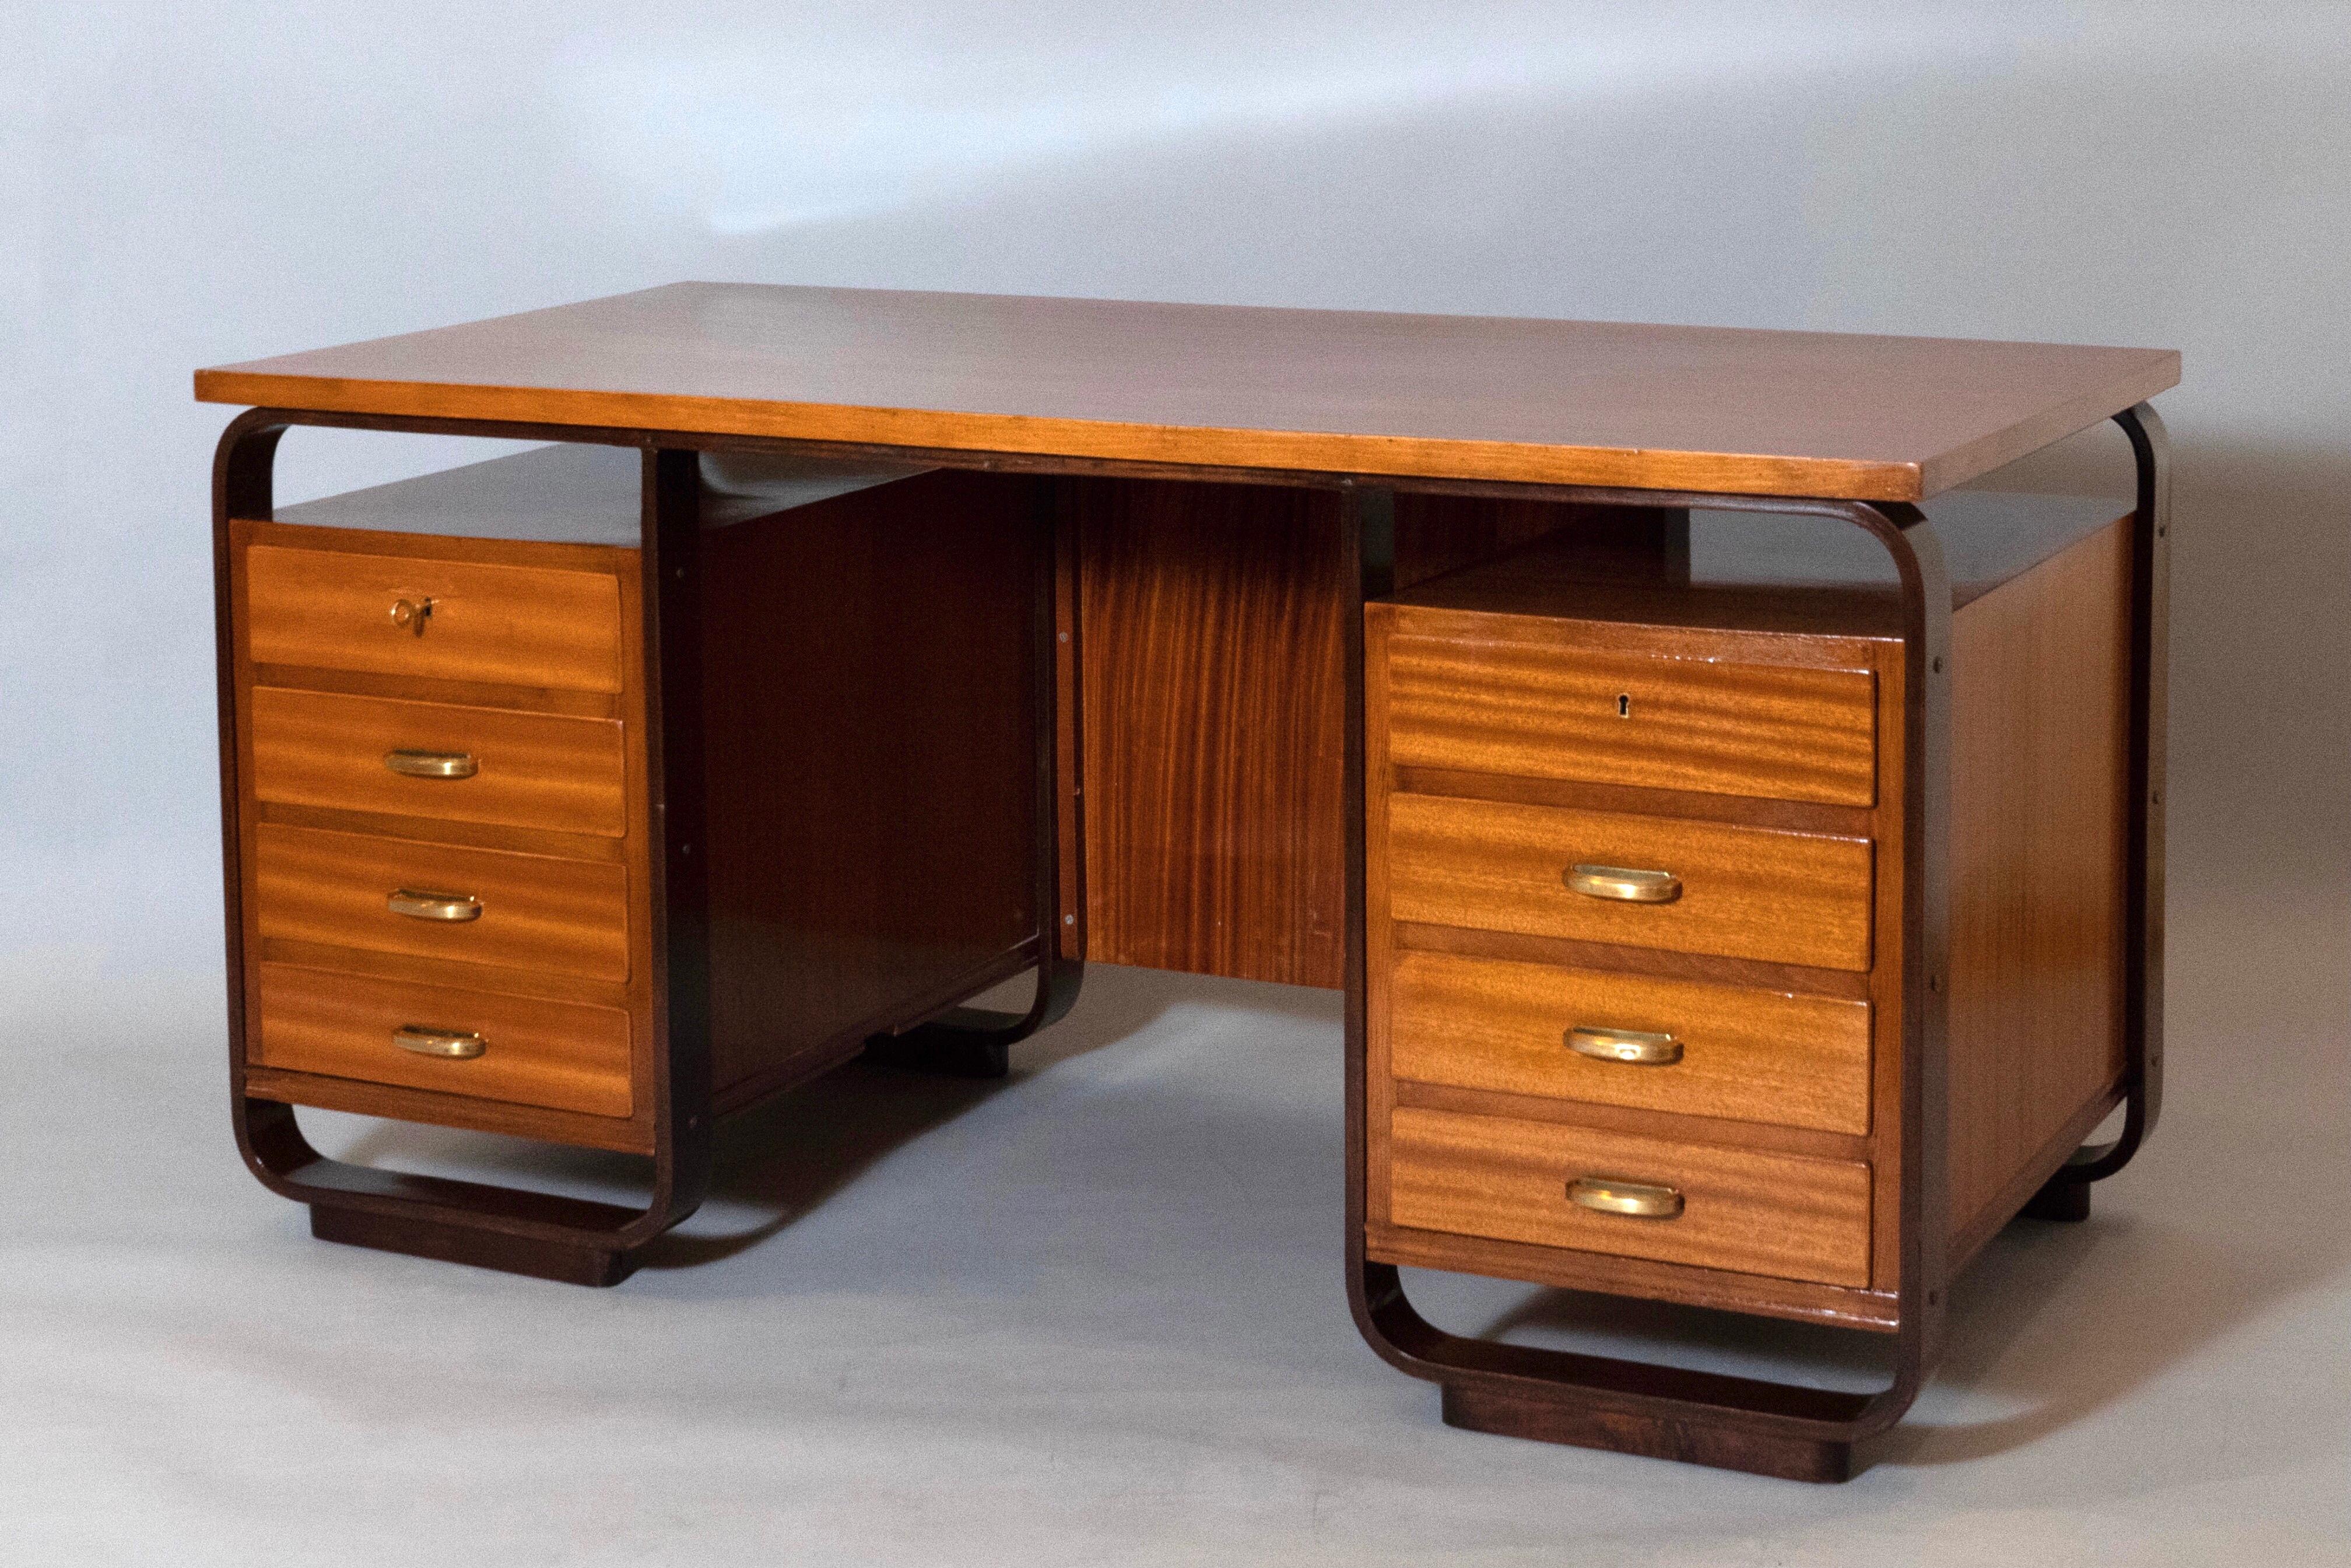 Giuseppe Pagano: Eight Drawer Desk in Fruitwood and Brass, Italy 1940 For Sale 3